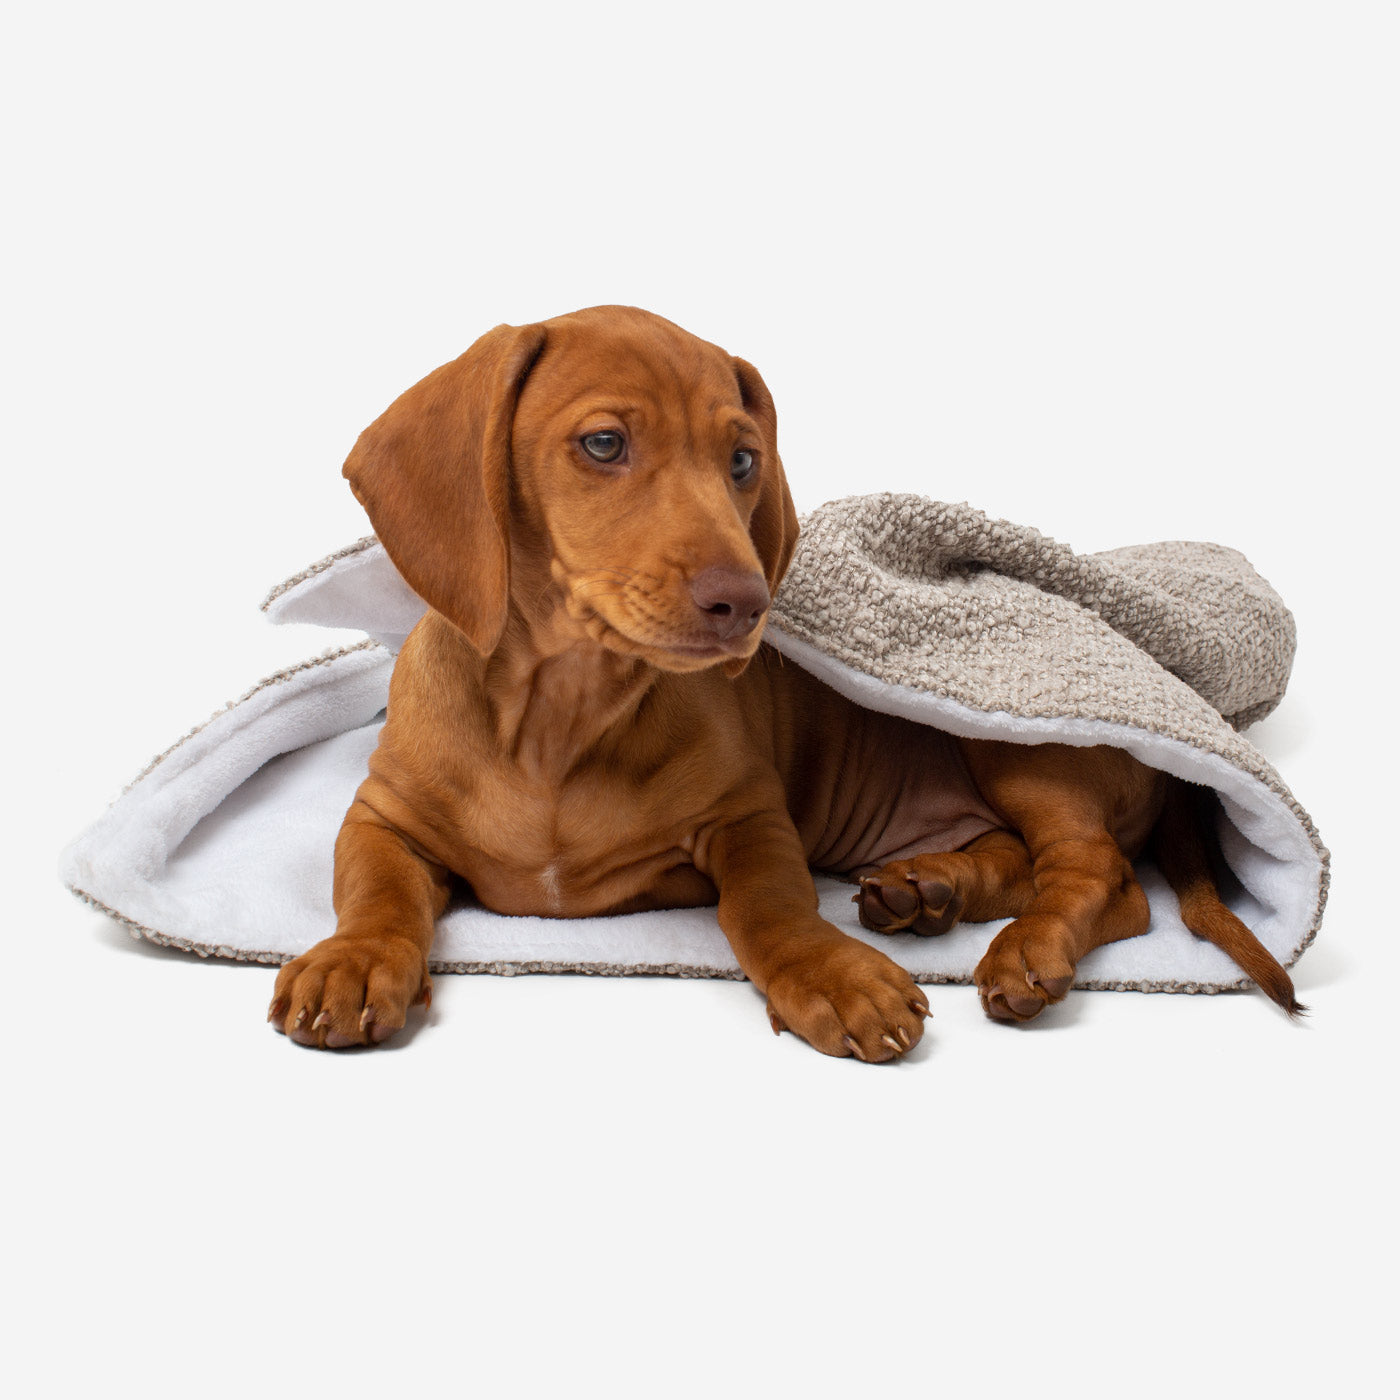 Discover Our Luxurious Dog Blanket In Luxury Mink Bouclé Super Soft Sherpa & Teddy Fleece Lining, The Perfect Blanket For Puppies, Available To Personalize And In 2 Sizes Here at Lords & Labradors US